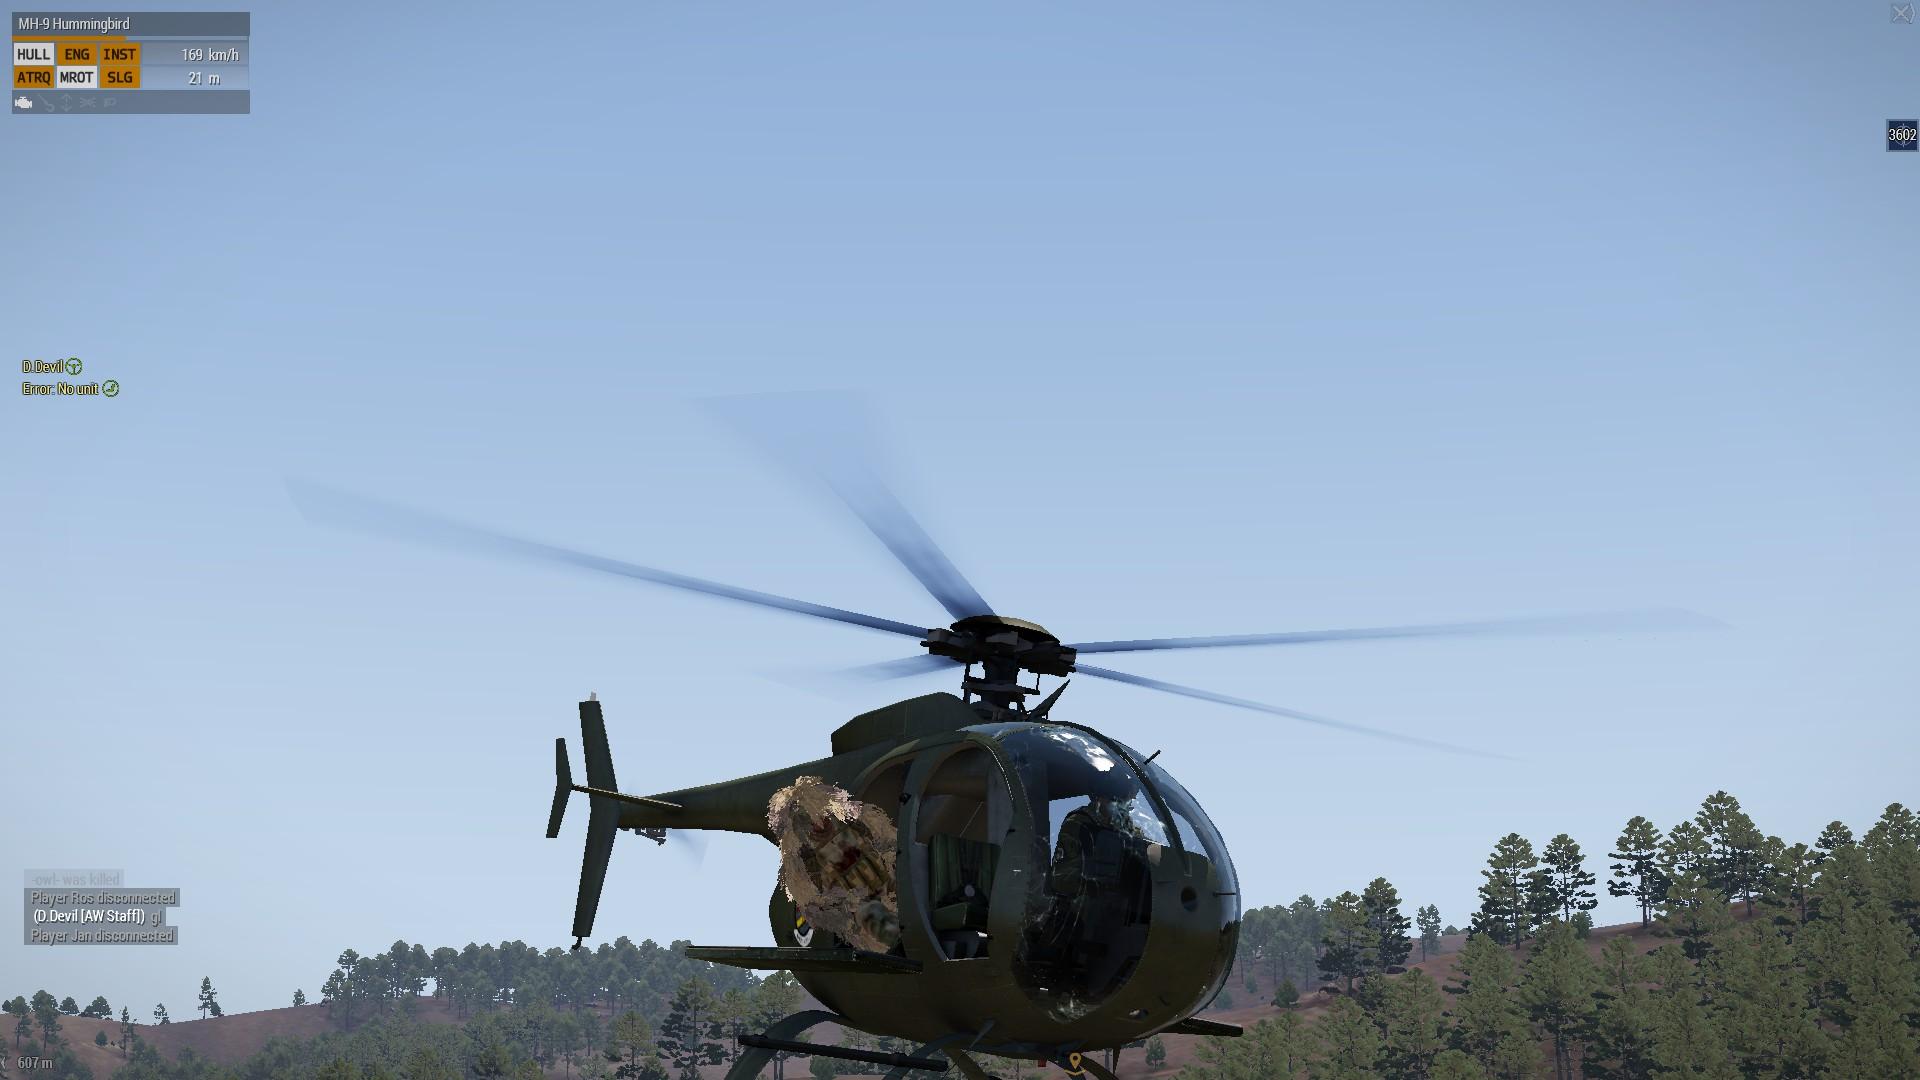 A wild Ansin11 hanging out of my heli